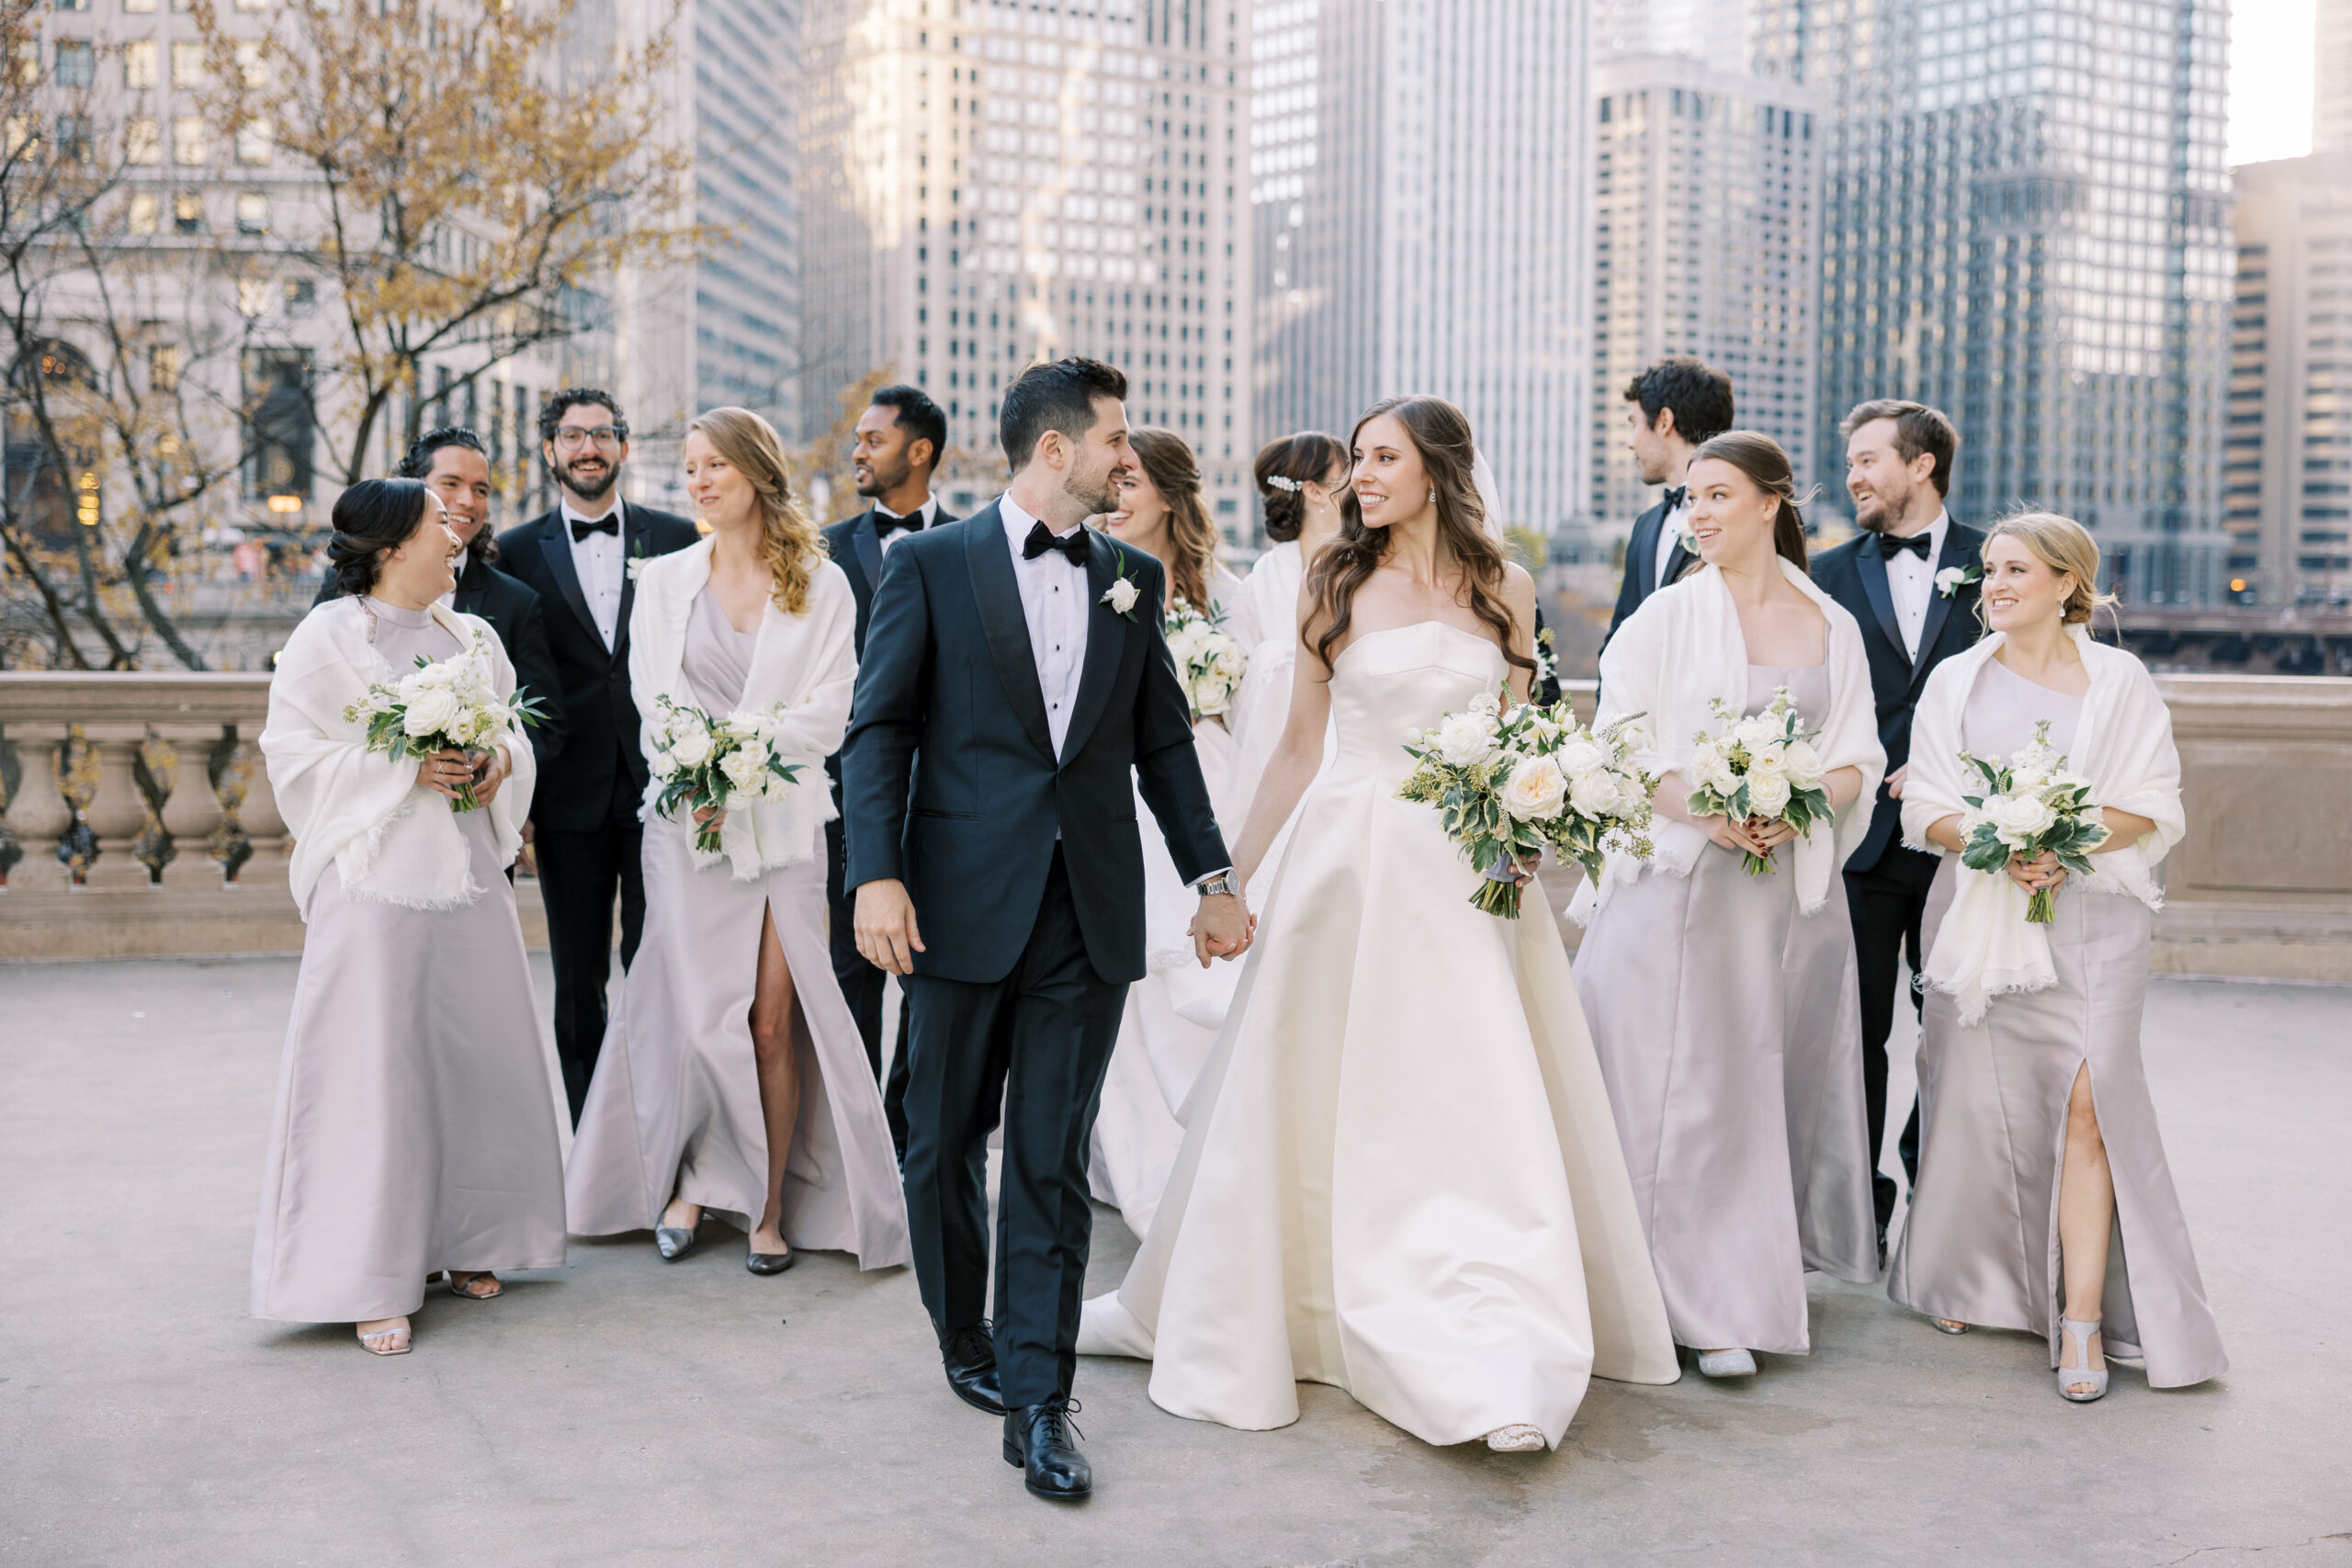 Bride and groom walking with their bridal party in downtown Chicago, planned by Chicago wedding planner Savoir Fête. The Blackstone Hotel wedding highlights elegance and joy.